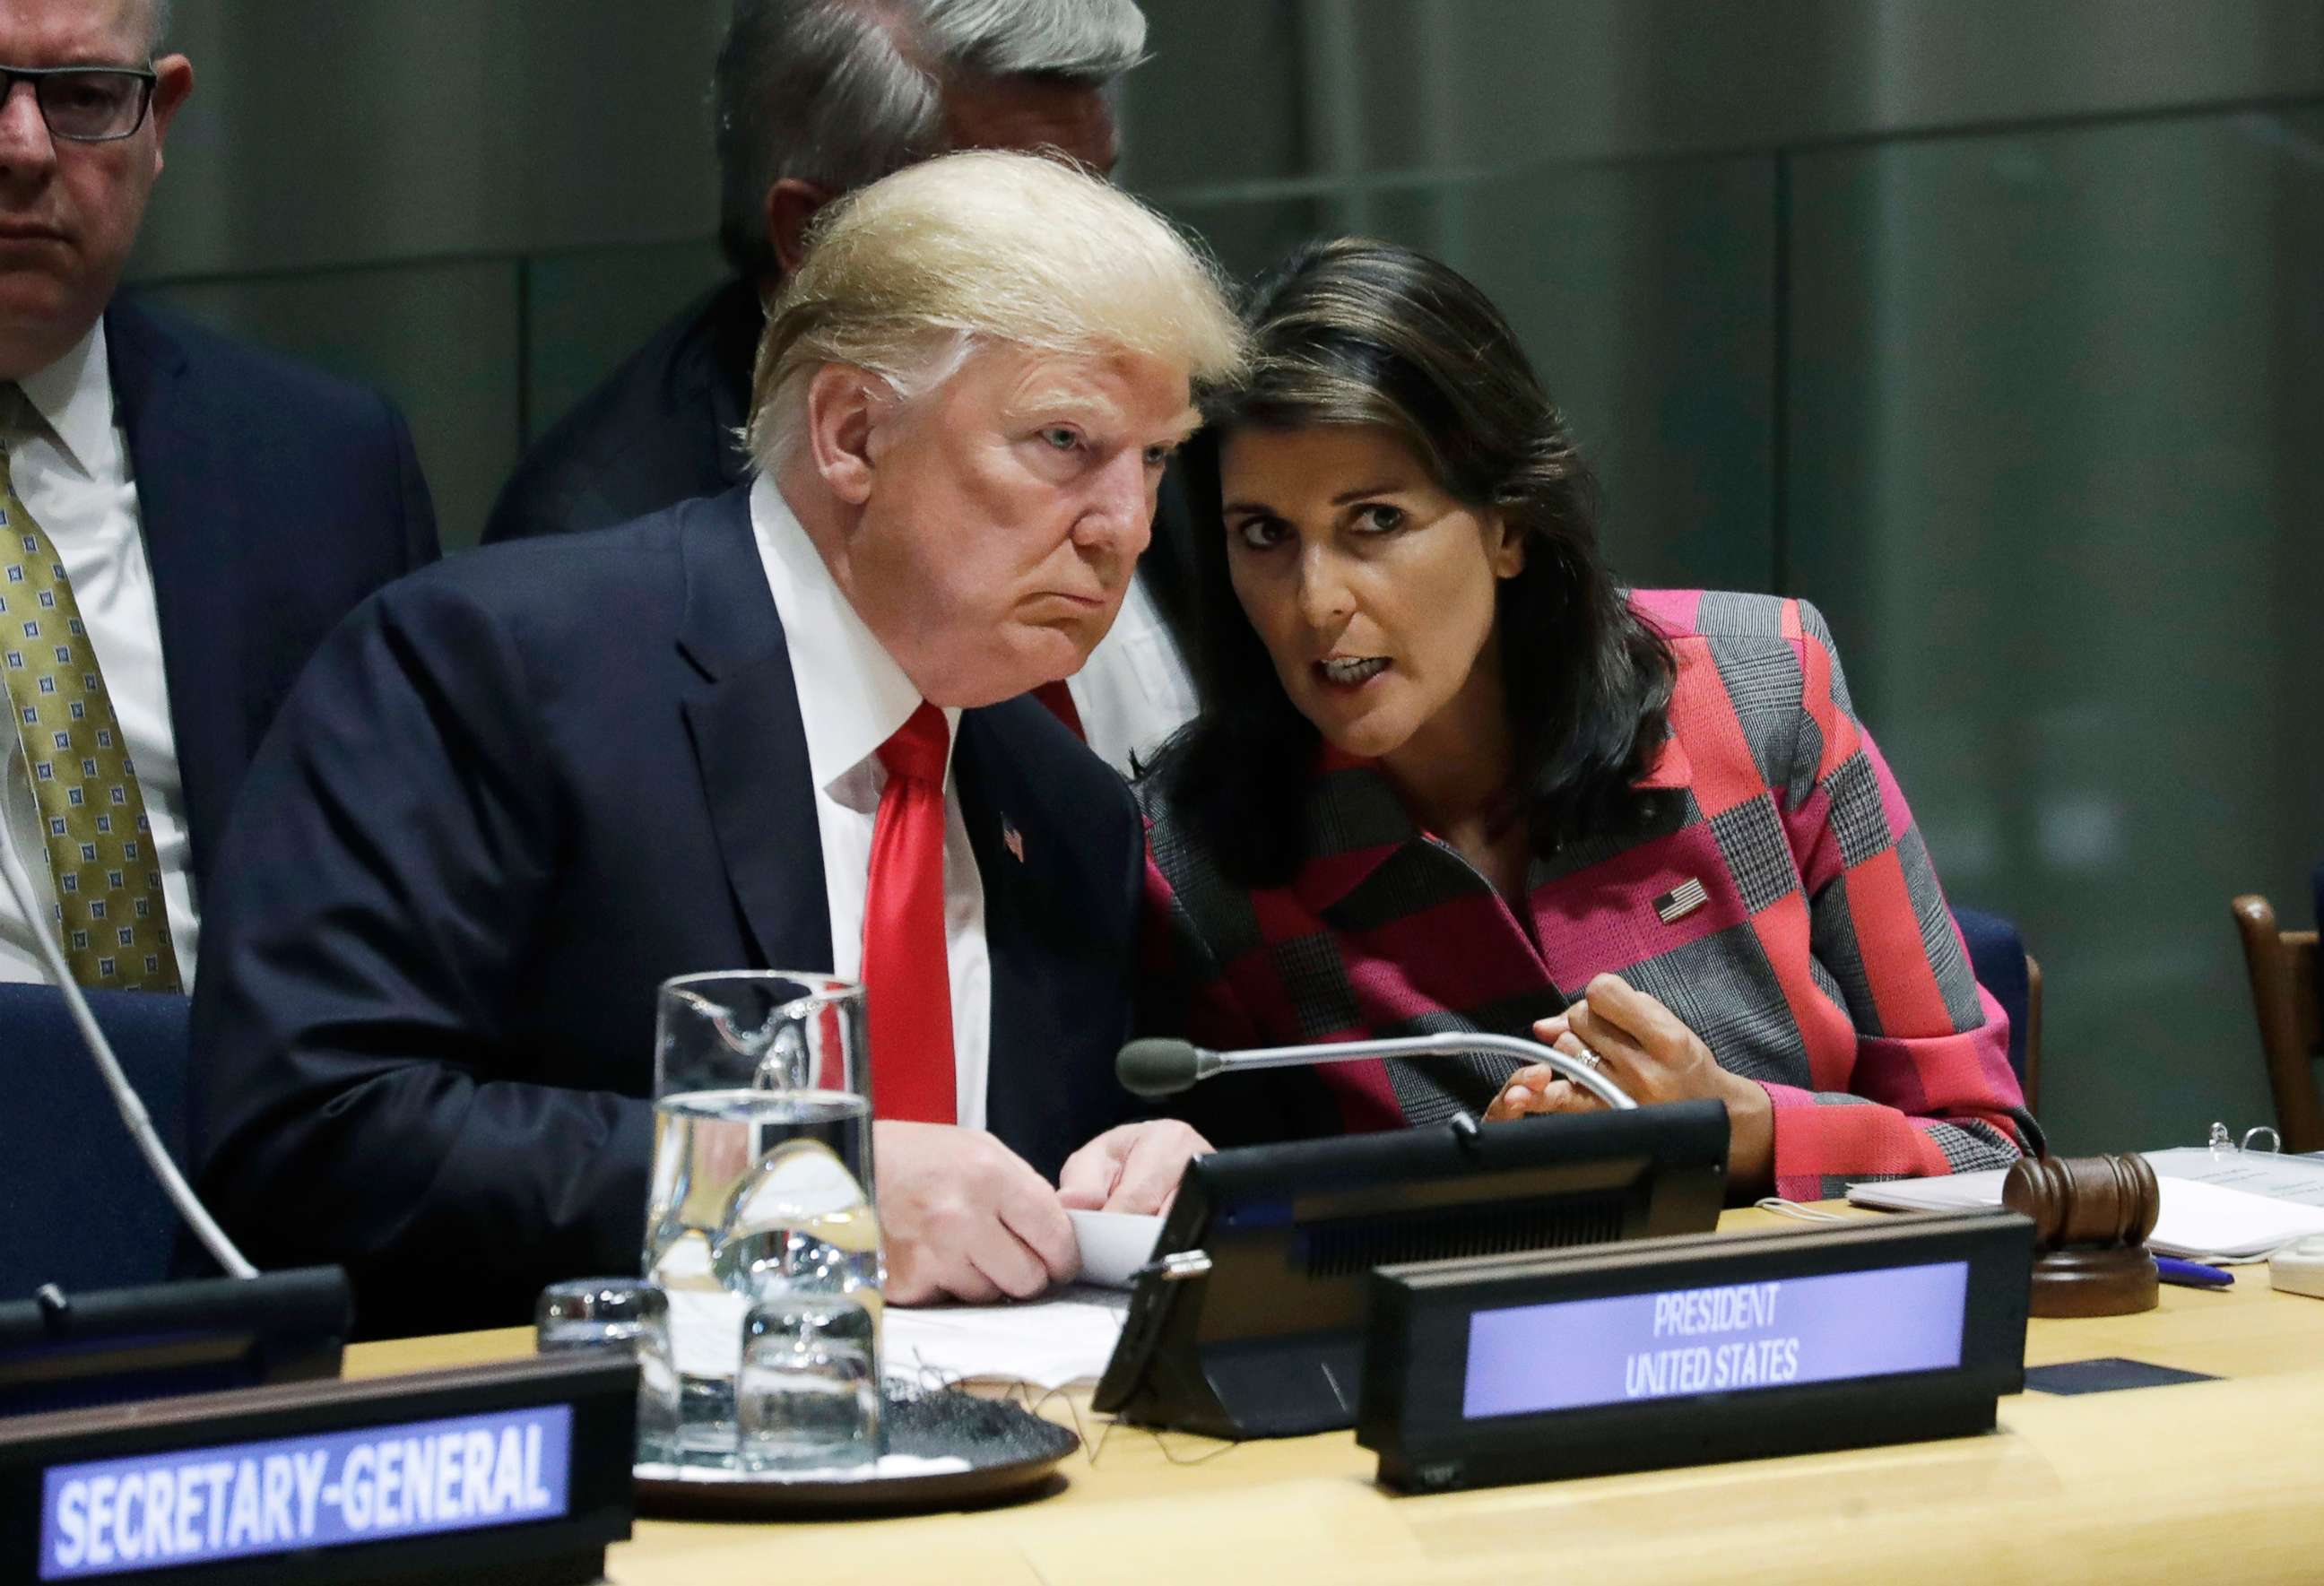 PHOTO: President Donald Trump talks to Nikki Haley, the U.S. Ambassador to the United Nations, at the United Nations General Assembly at U.N. headquarters, Sept. 24, 2018.